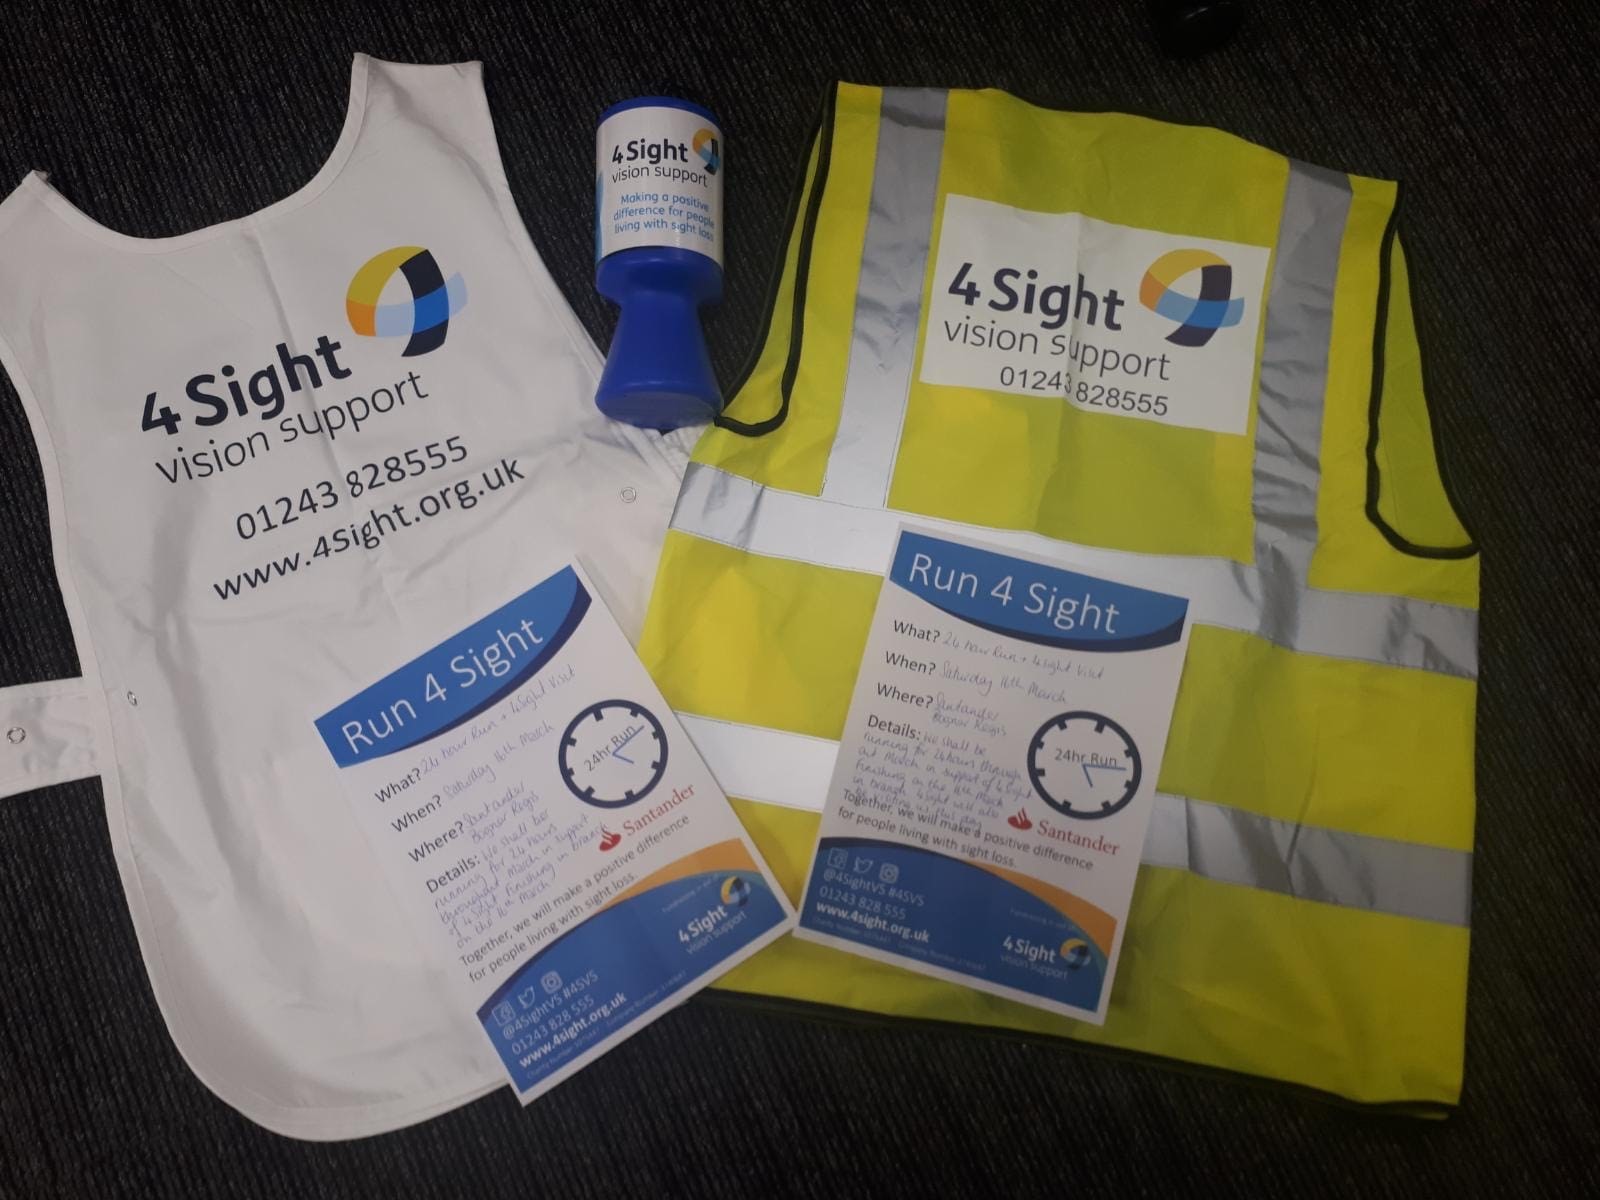 4Sight Vision Supportcharity bib and hi-vis jacket with blue collection can and posters.